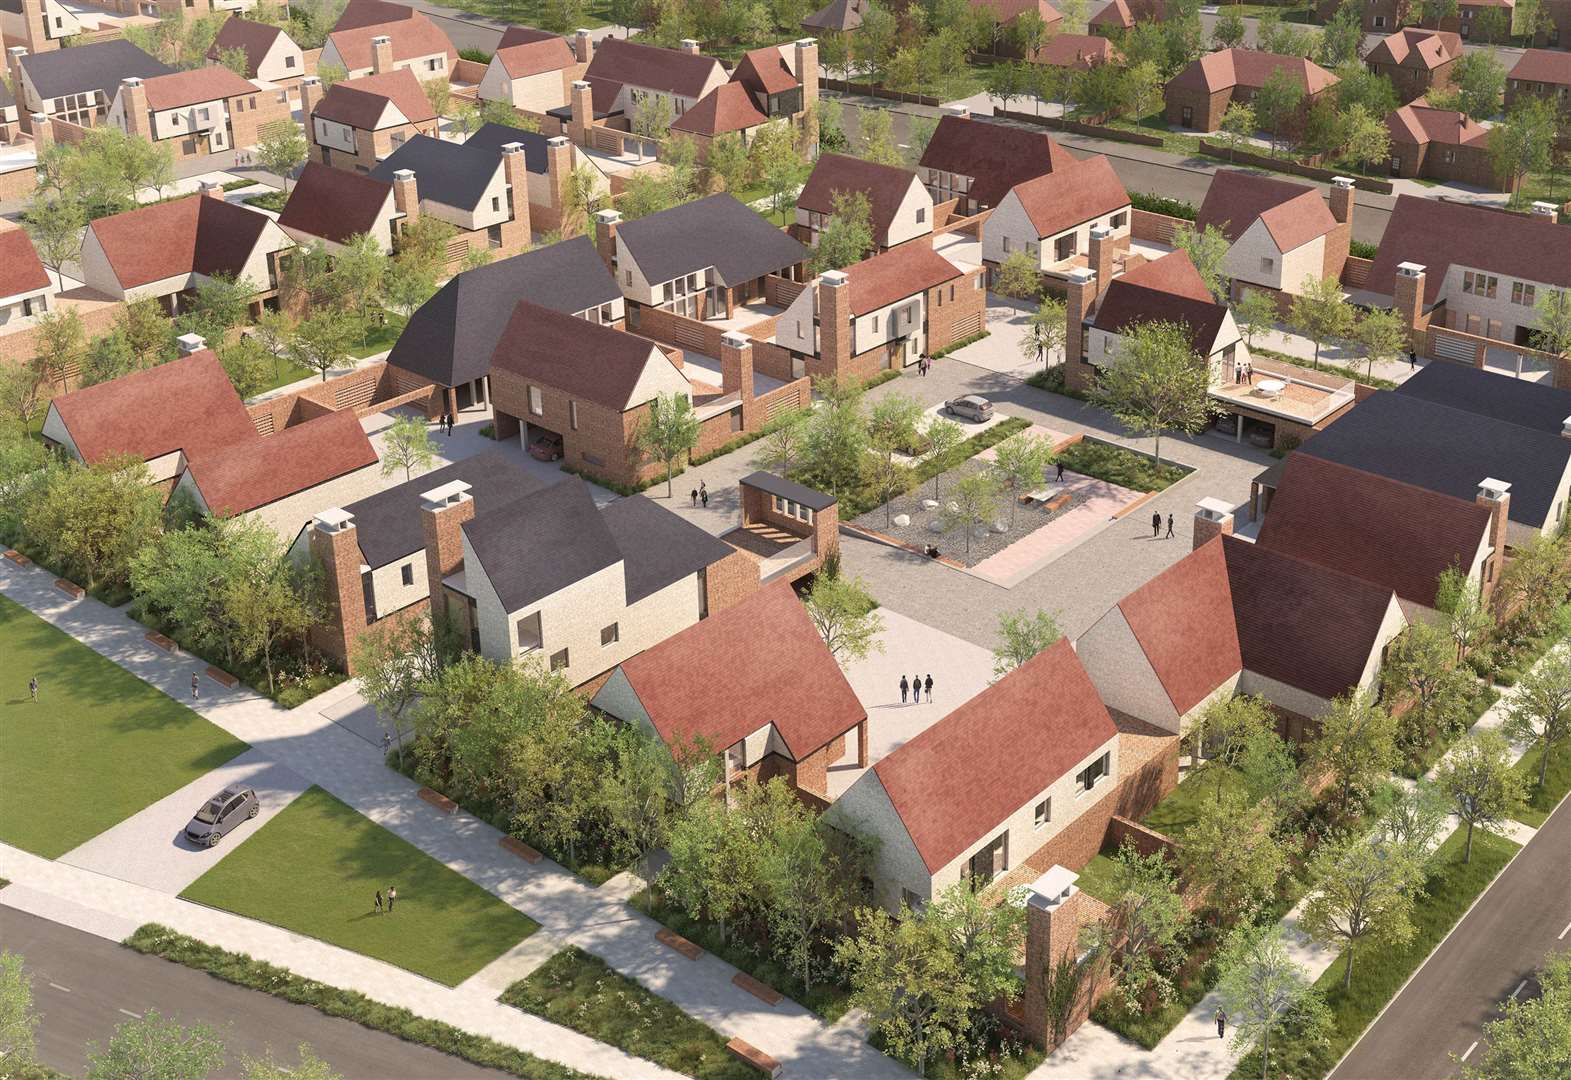 CGI of how the Mountfield Park development could look